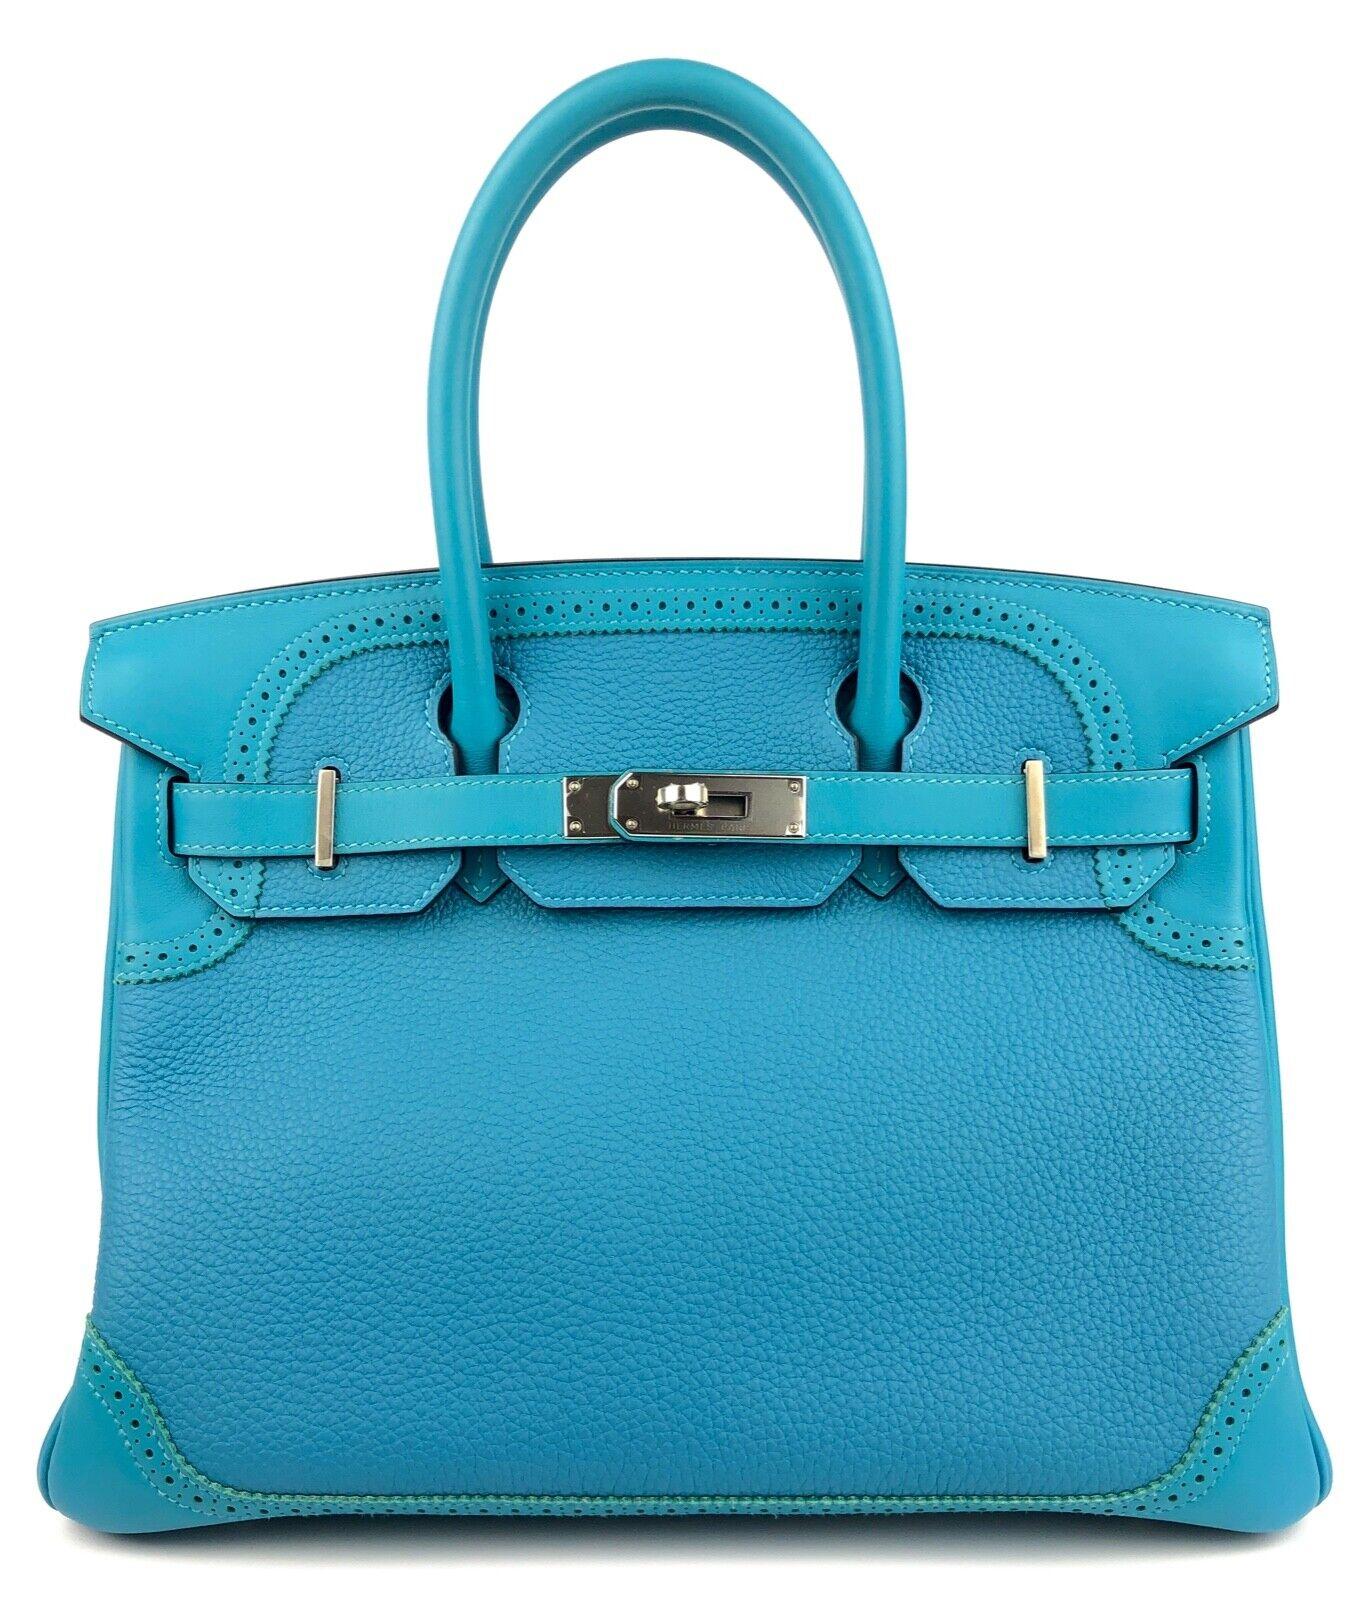 Stunning Rare Limited Edition Hermes Birkin 30 Ghillies Turquoise Palladium Hardware. Pristine Condition, Plastic on Hardware. Perfect corners and Structure. 

T Stamp 2015.

Shop with Confidence from Lux Addicts. Authenticity Guaranteed!

Please